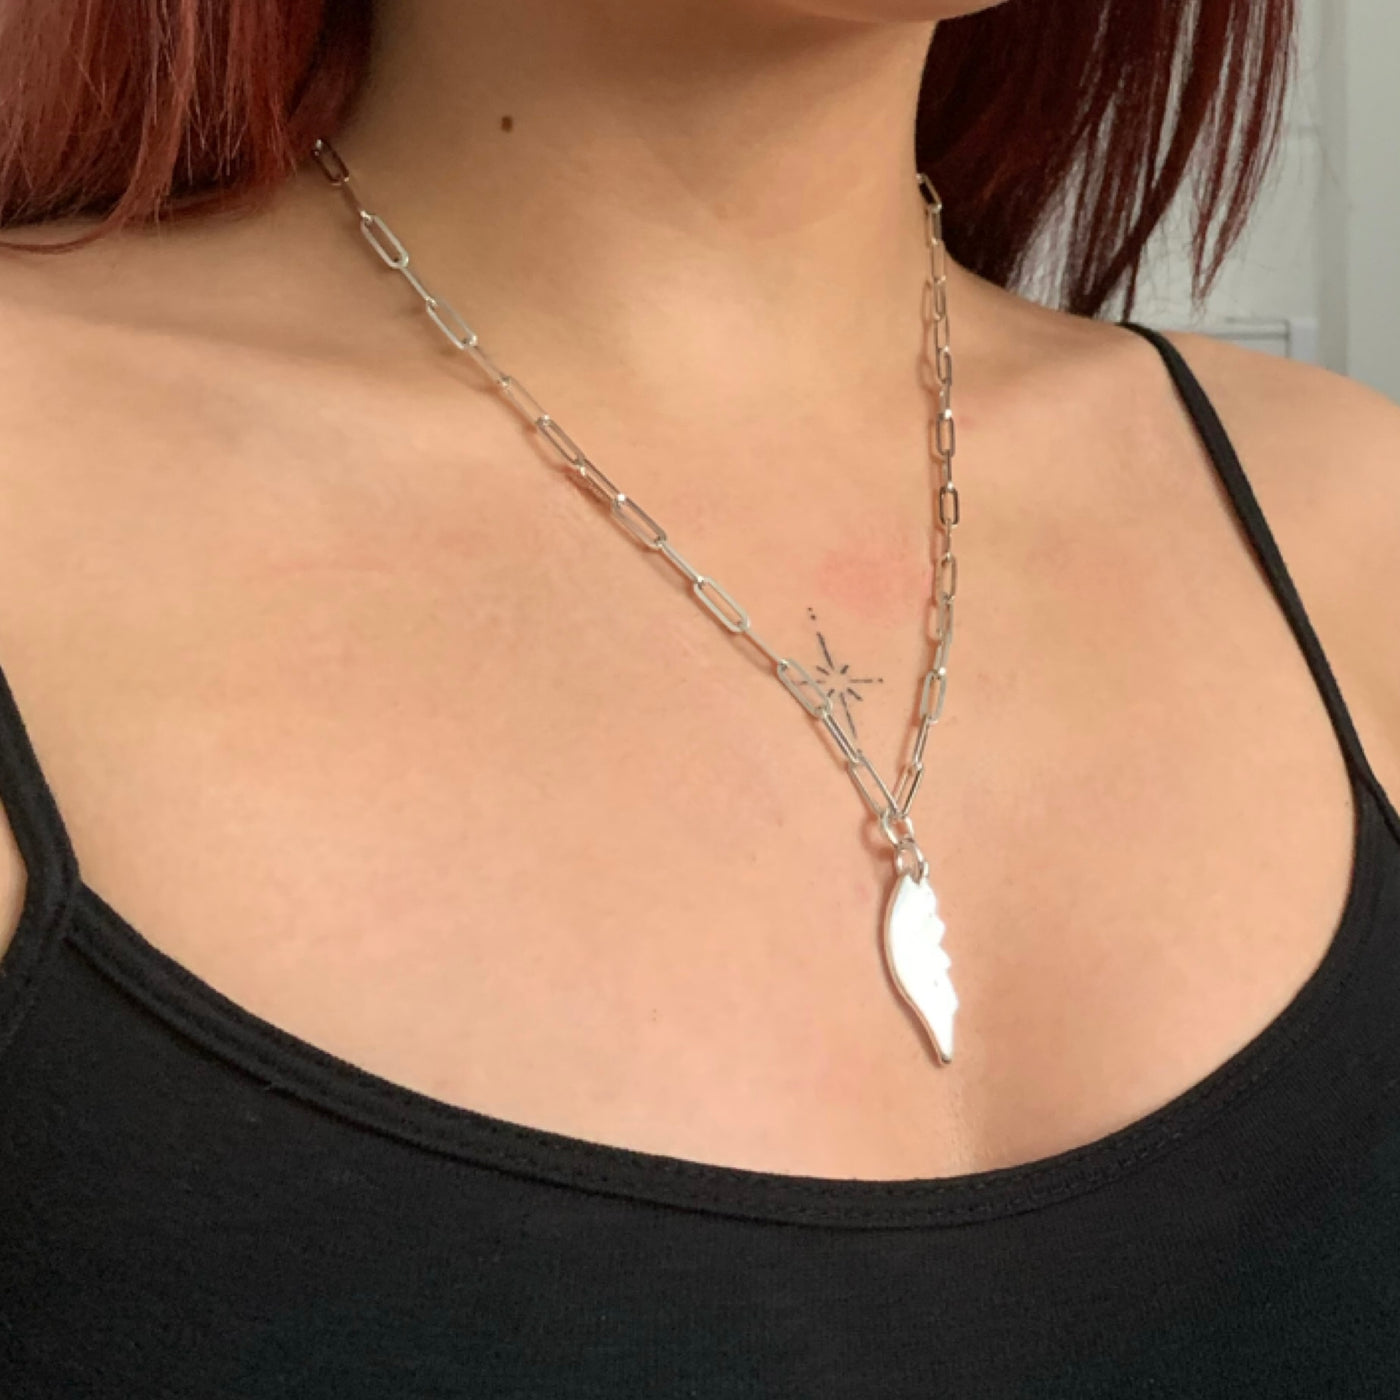 Handmade solid sterling silver chunky angel wing charm on a recycled silver trace chain necklace from SilverBoo Jewellery in Lincolnshire